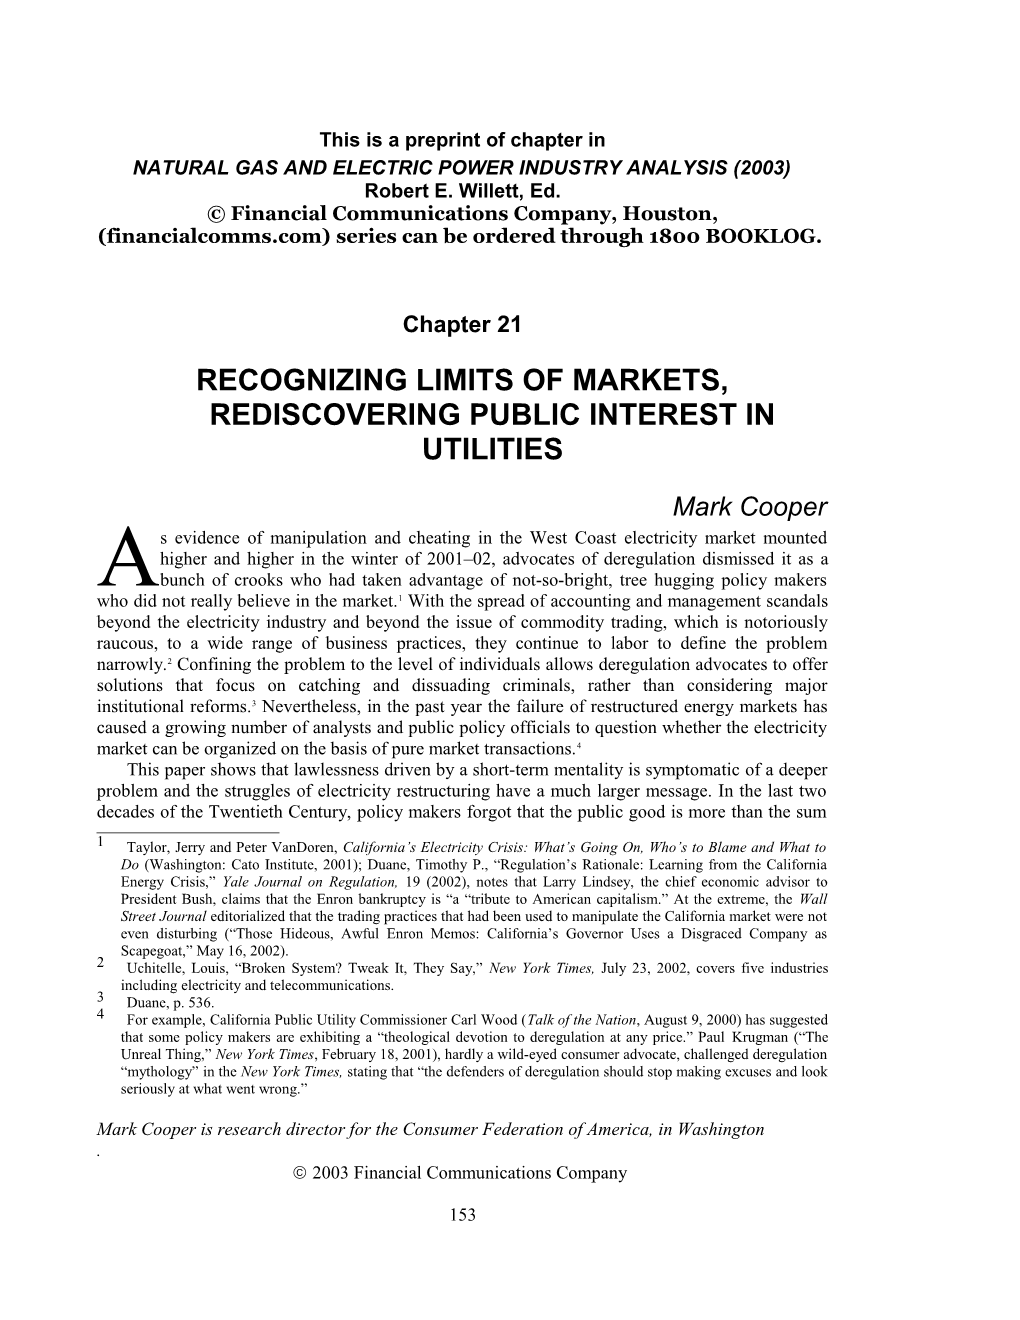 Natural Gas and Electric Power Industry Analysis (2003)